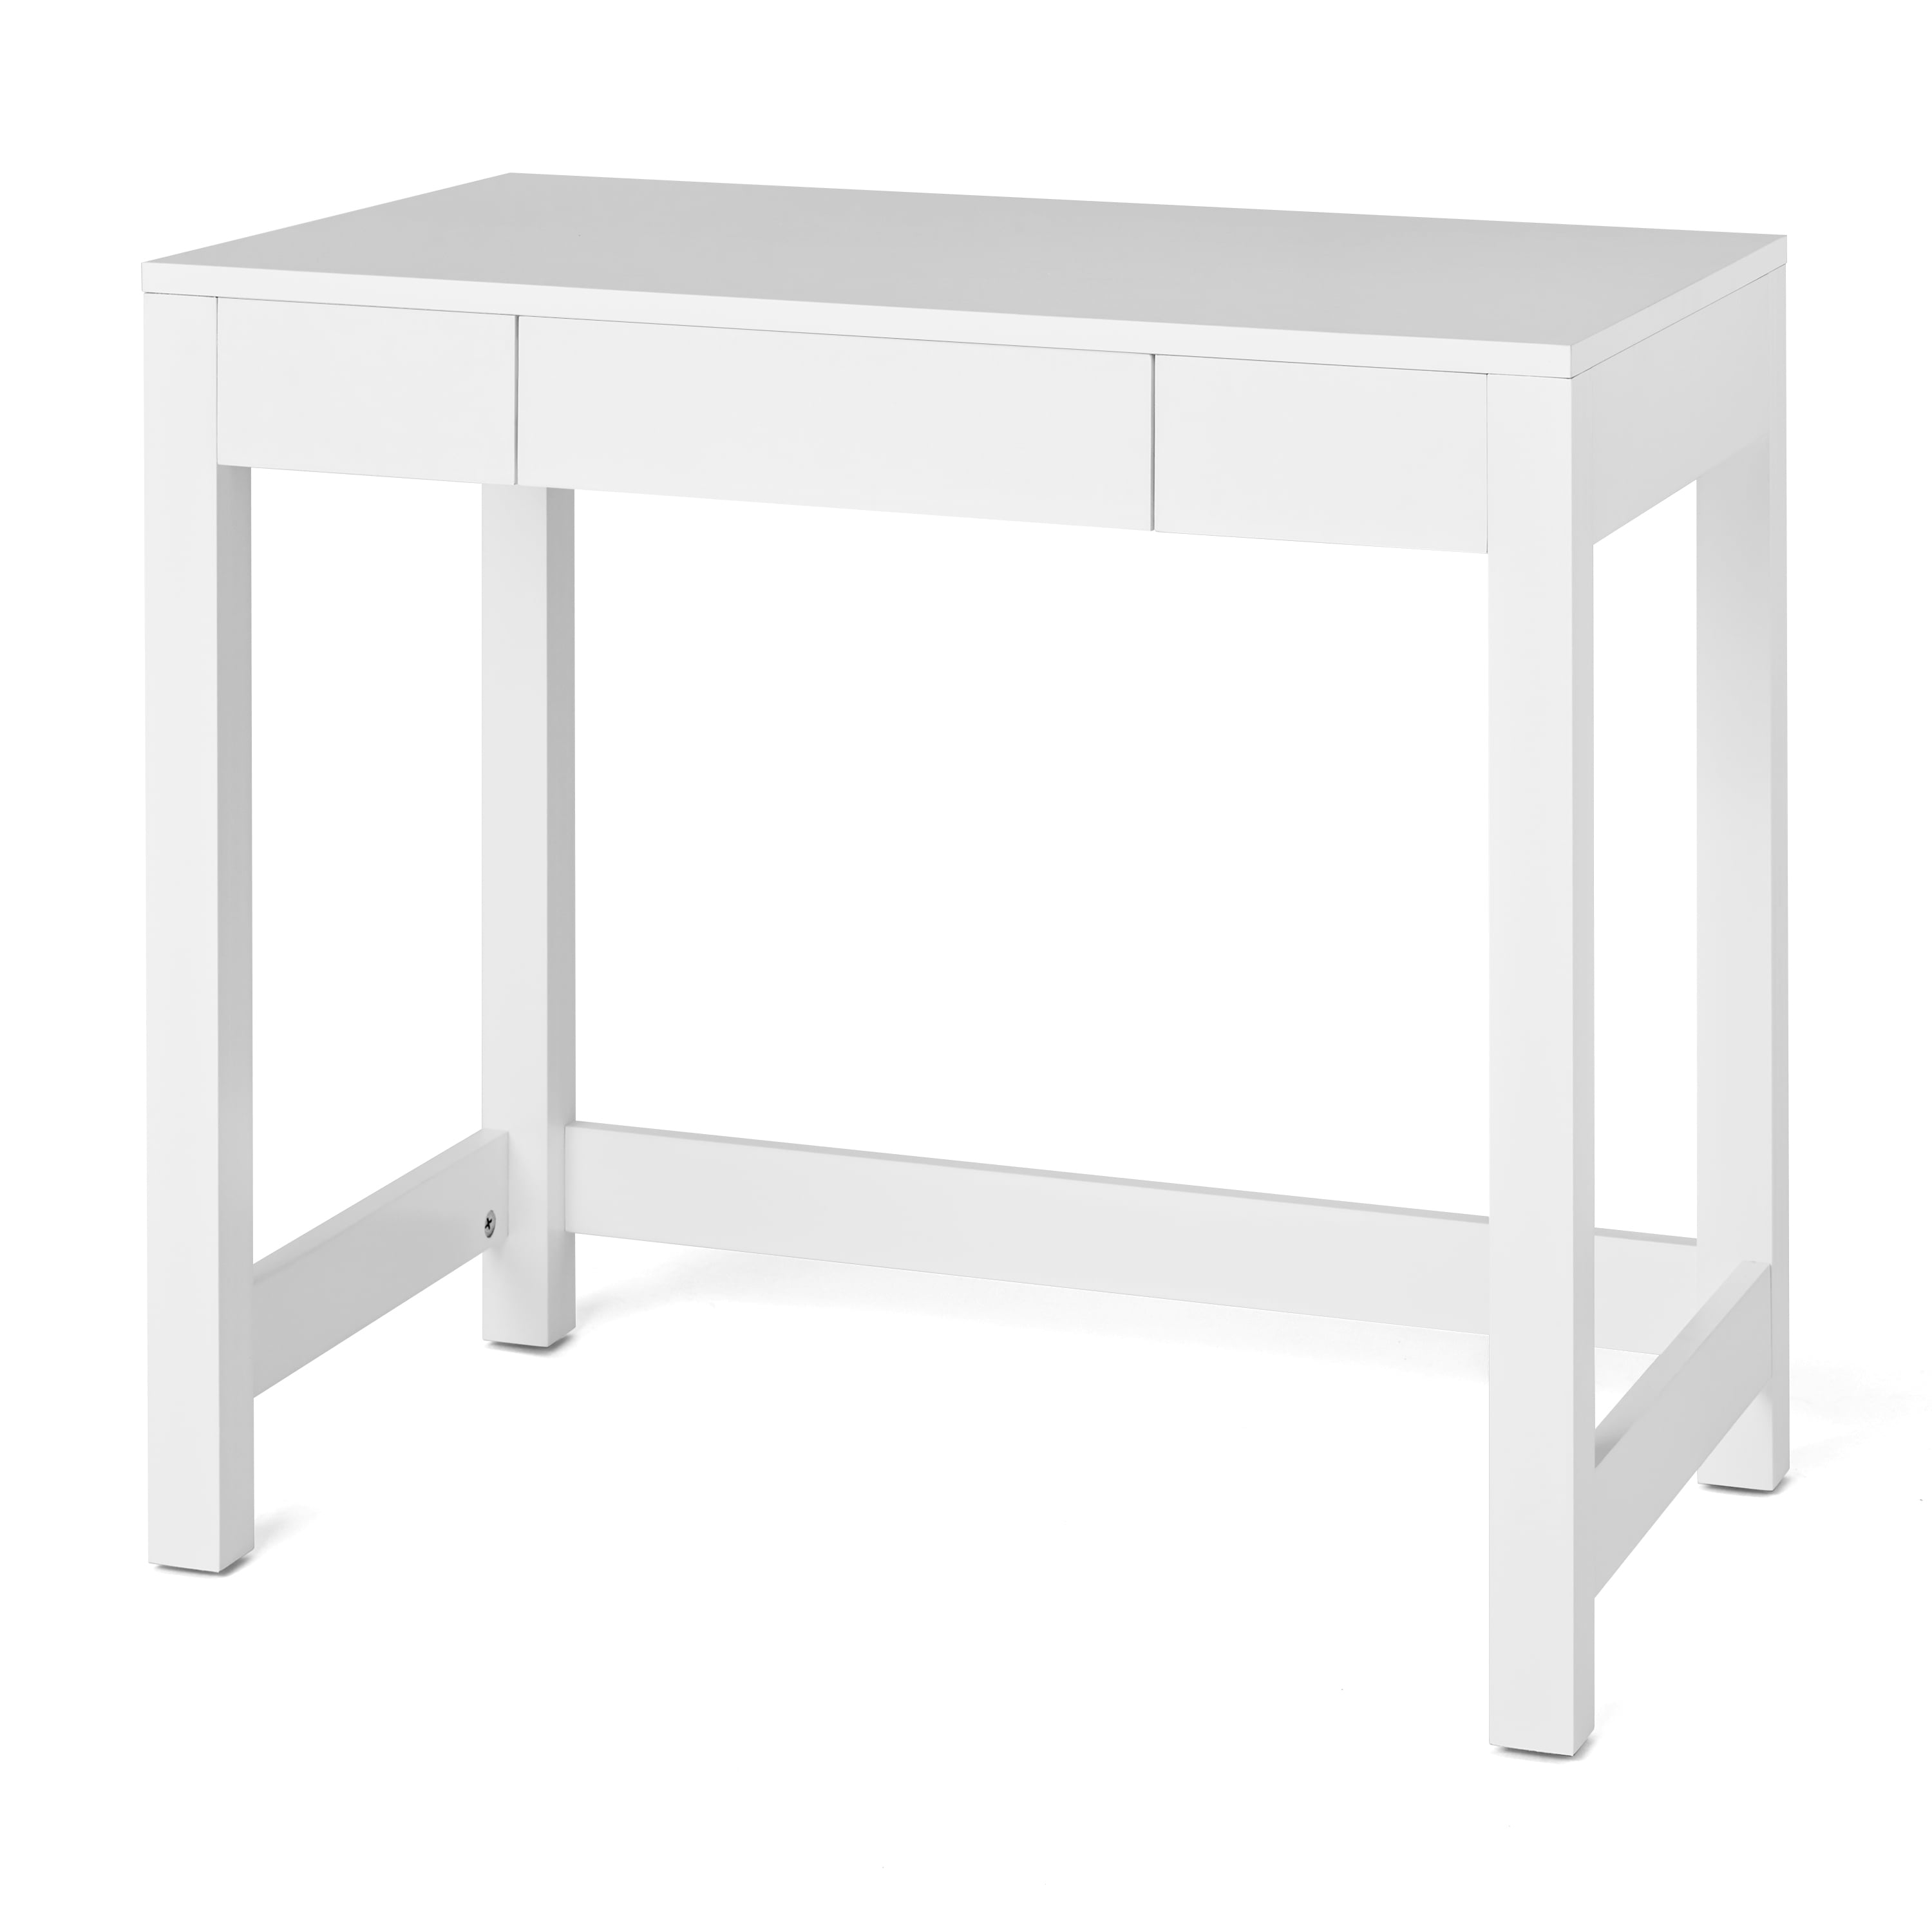 Your Zone Single Drawer Parsons Desk Multiple Finishes Walmart